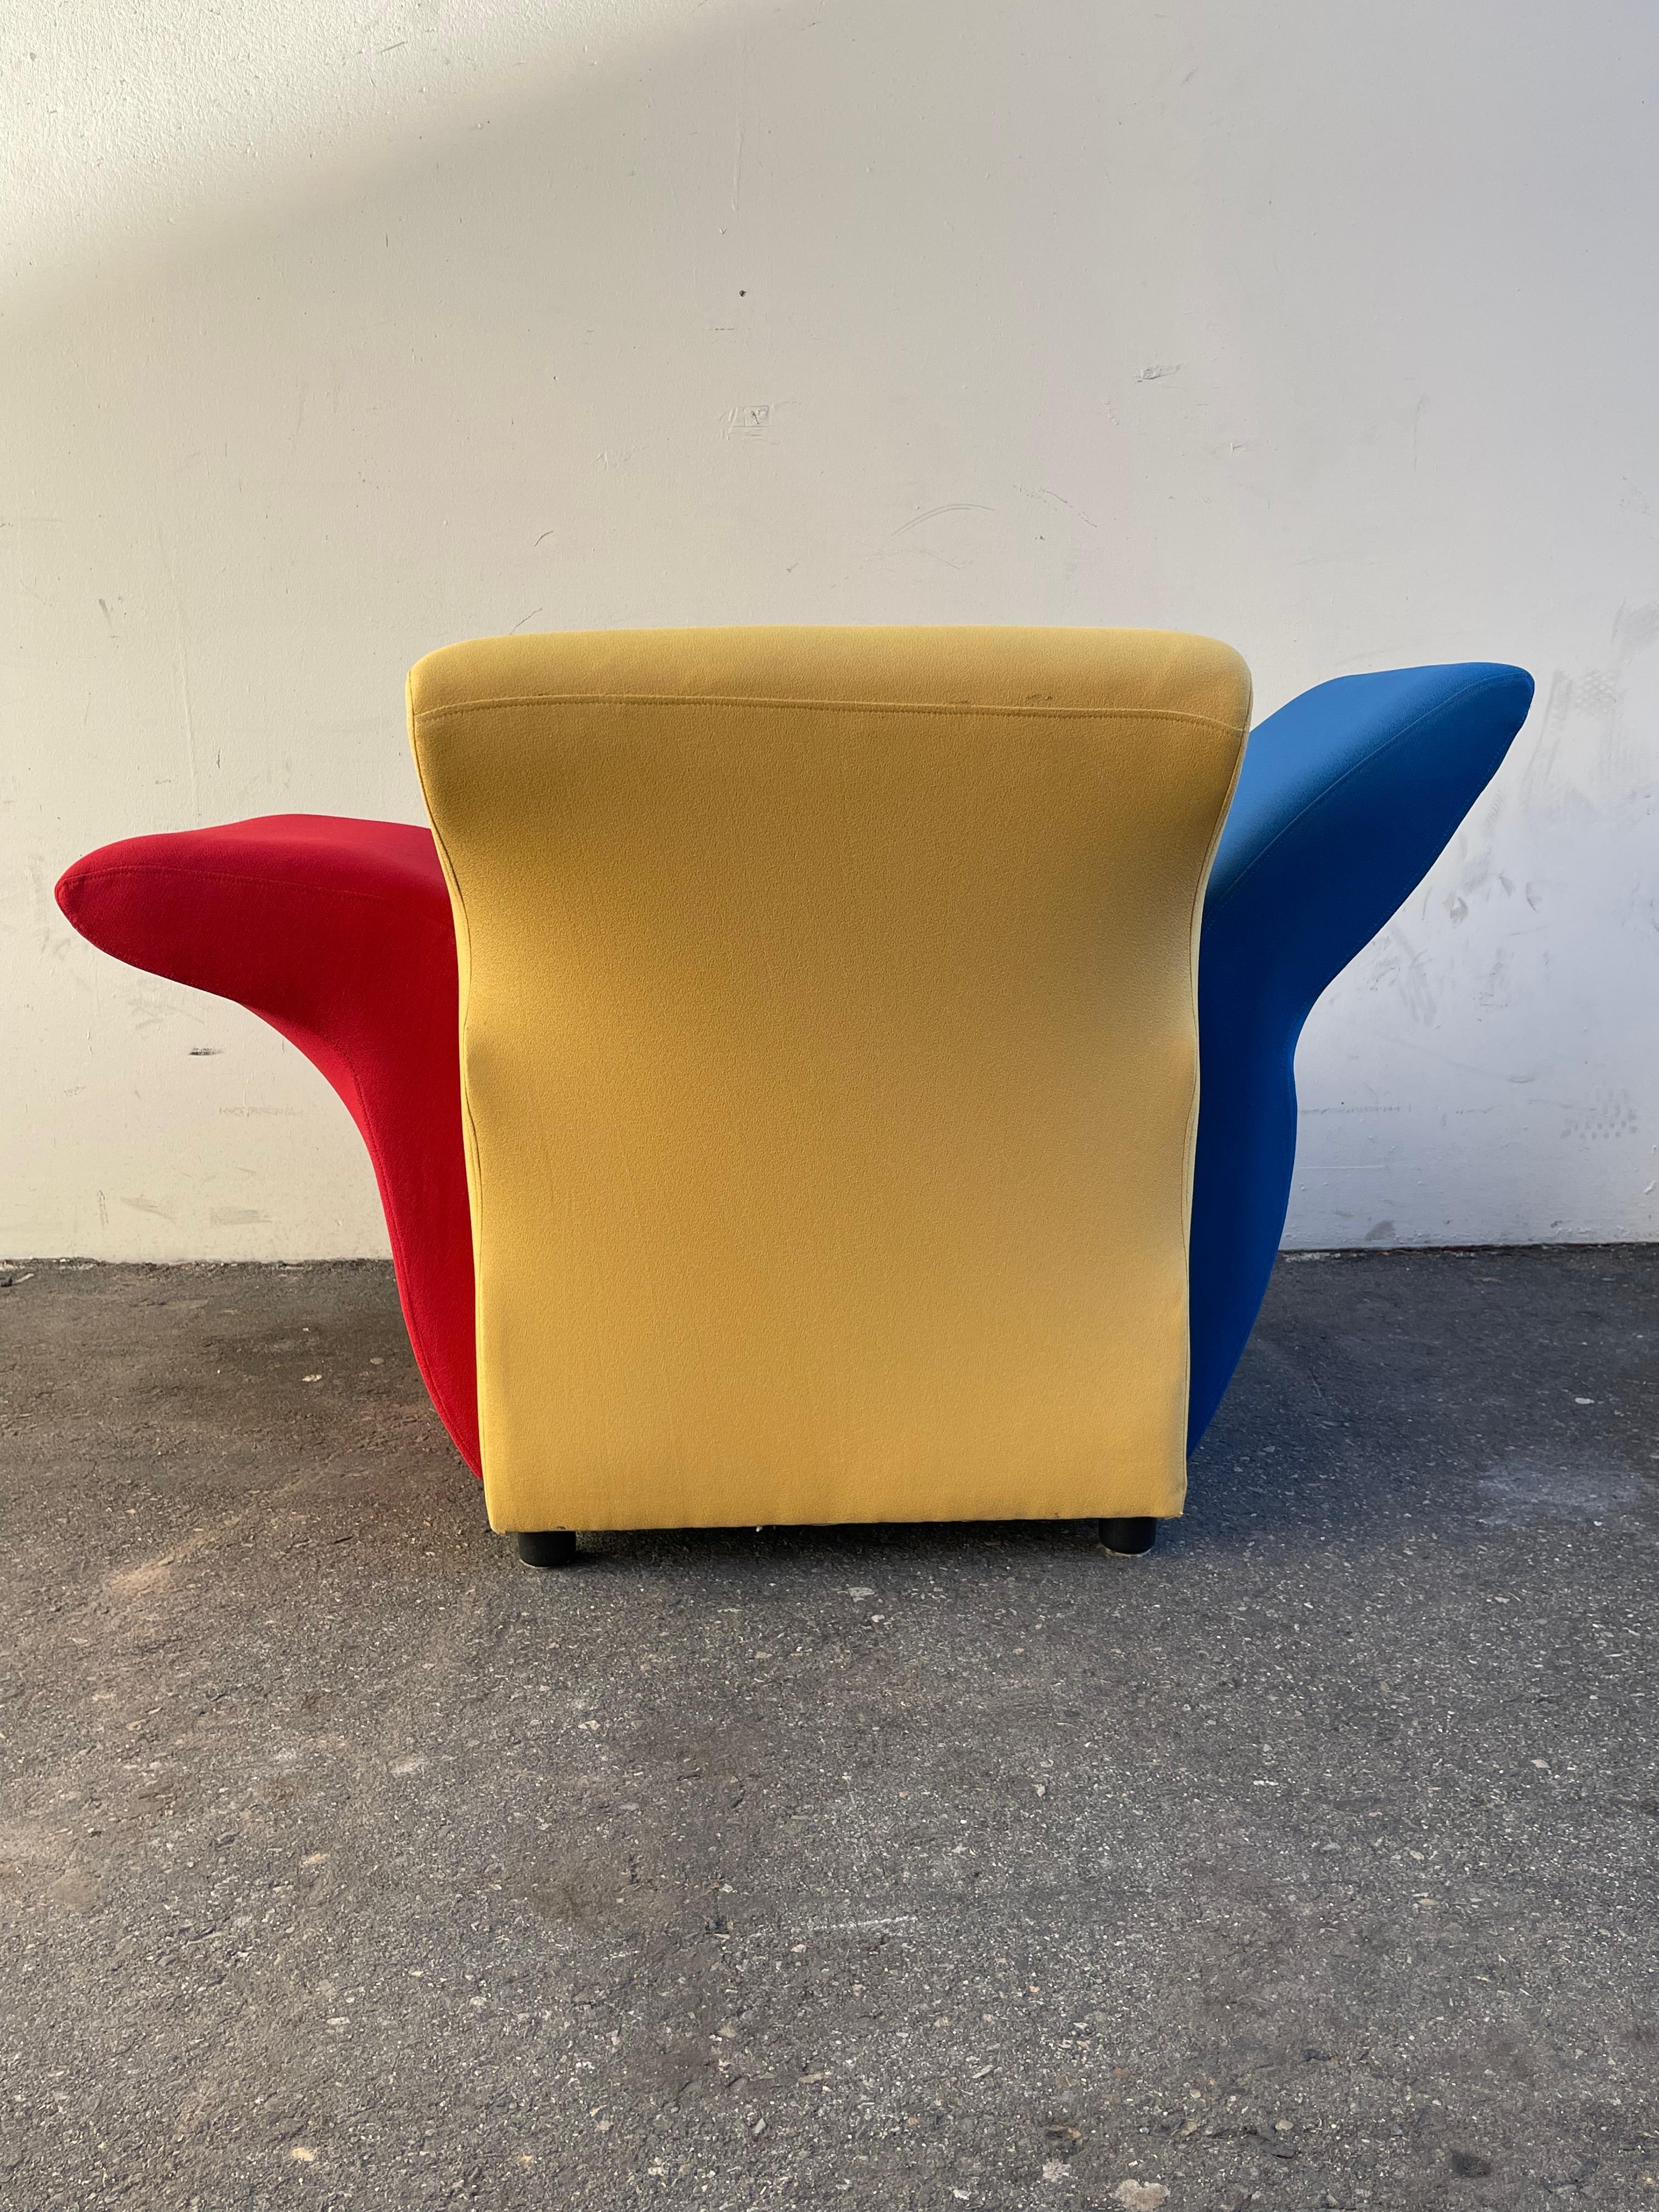 Postmodern Multicolor Lounge Chairs by David Burry, Montreal, 1980s For Sale 1